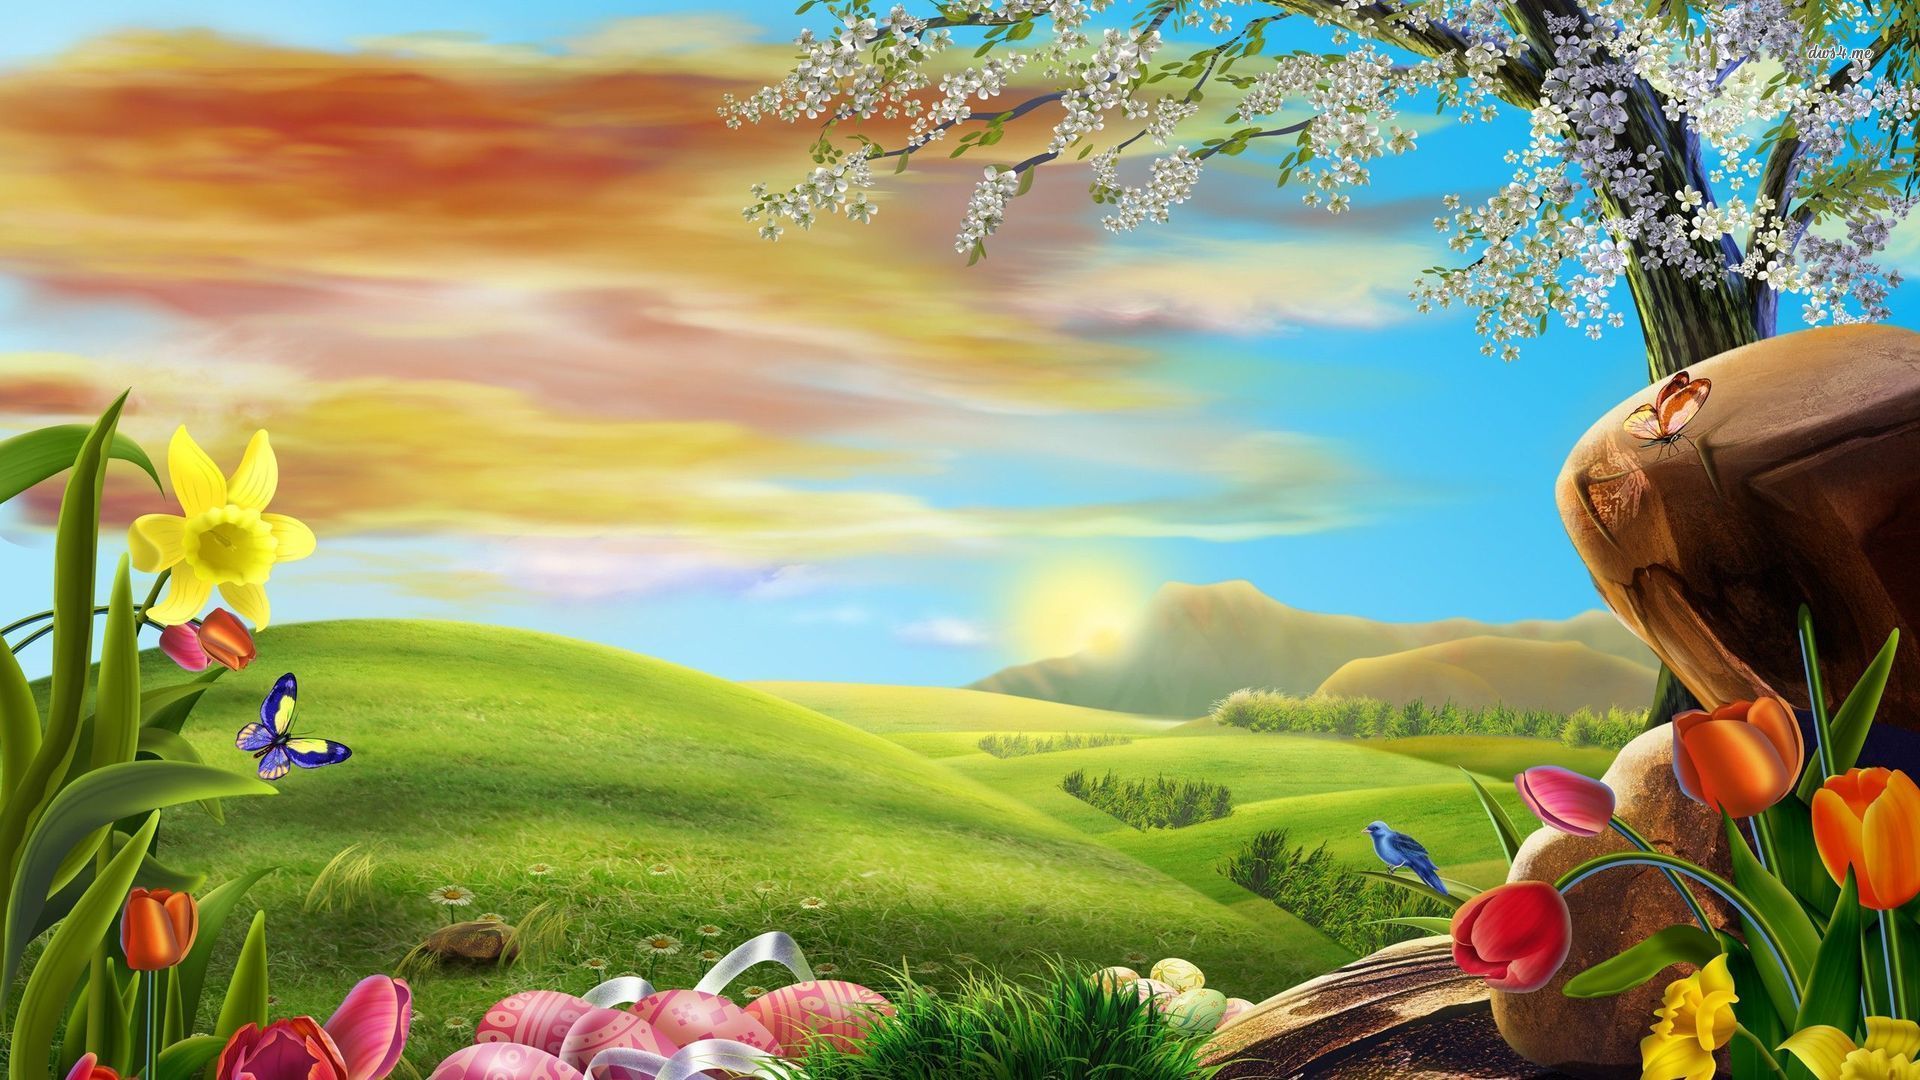 Easter Wallpaper HD download free | Wallpapers, Backgrounds ...